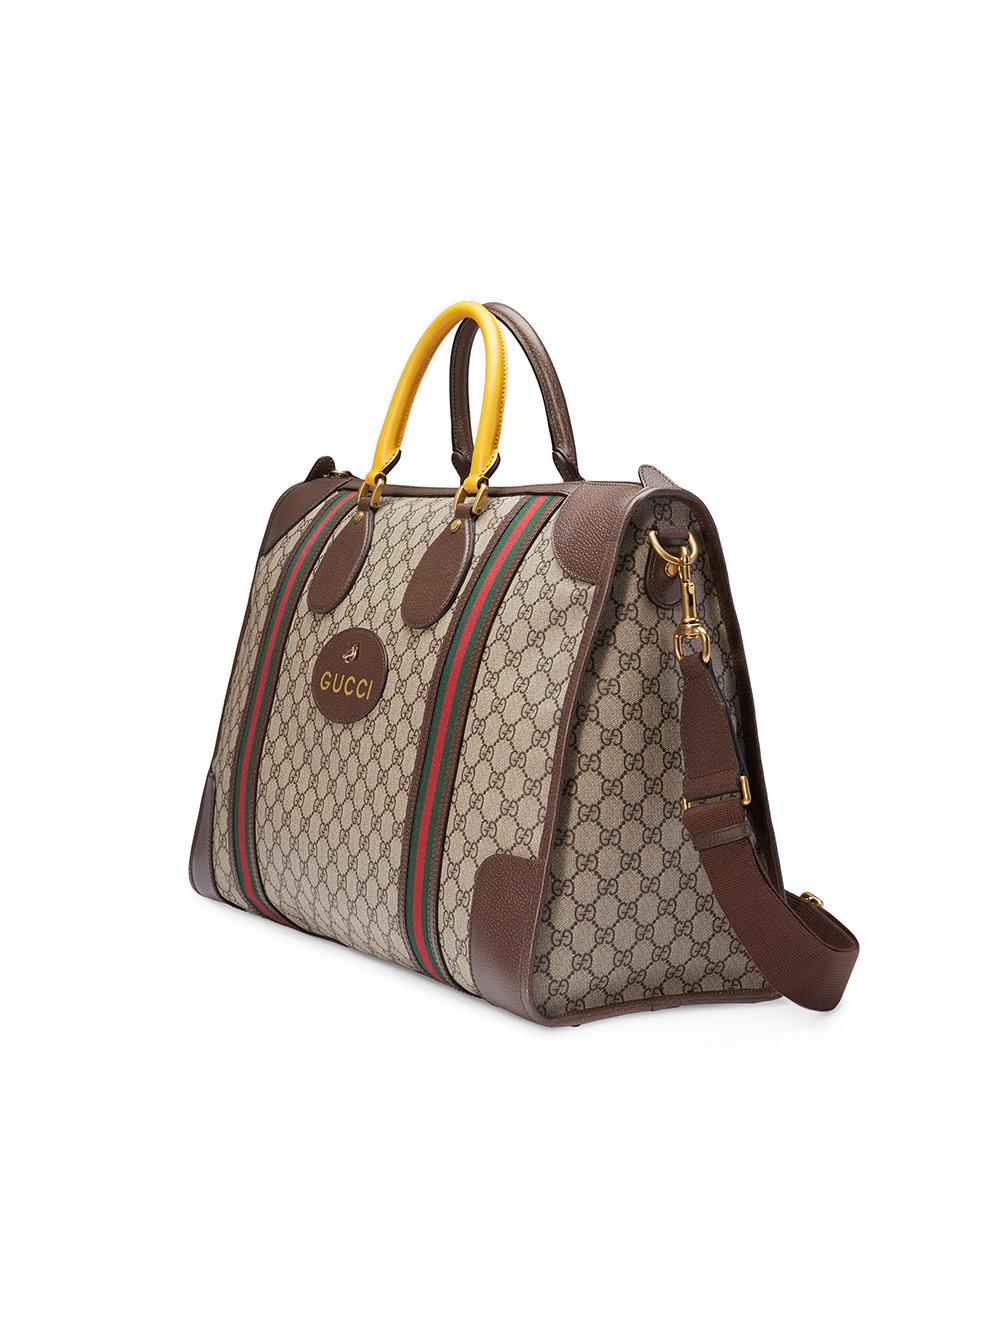 Lyst - Gucci Soft Gg Supreme Duffle Bag With Web in Brown